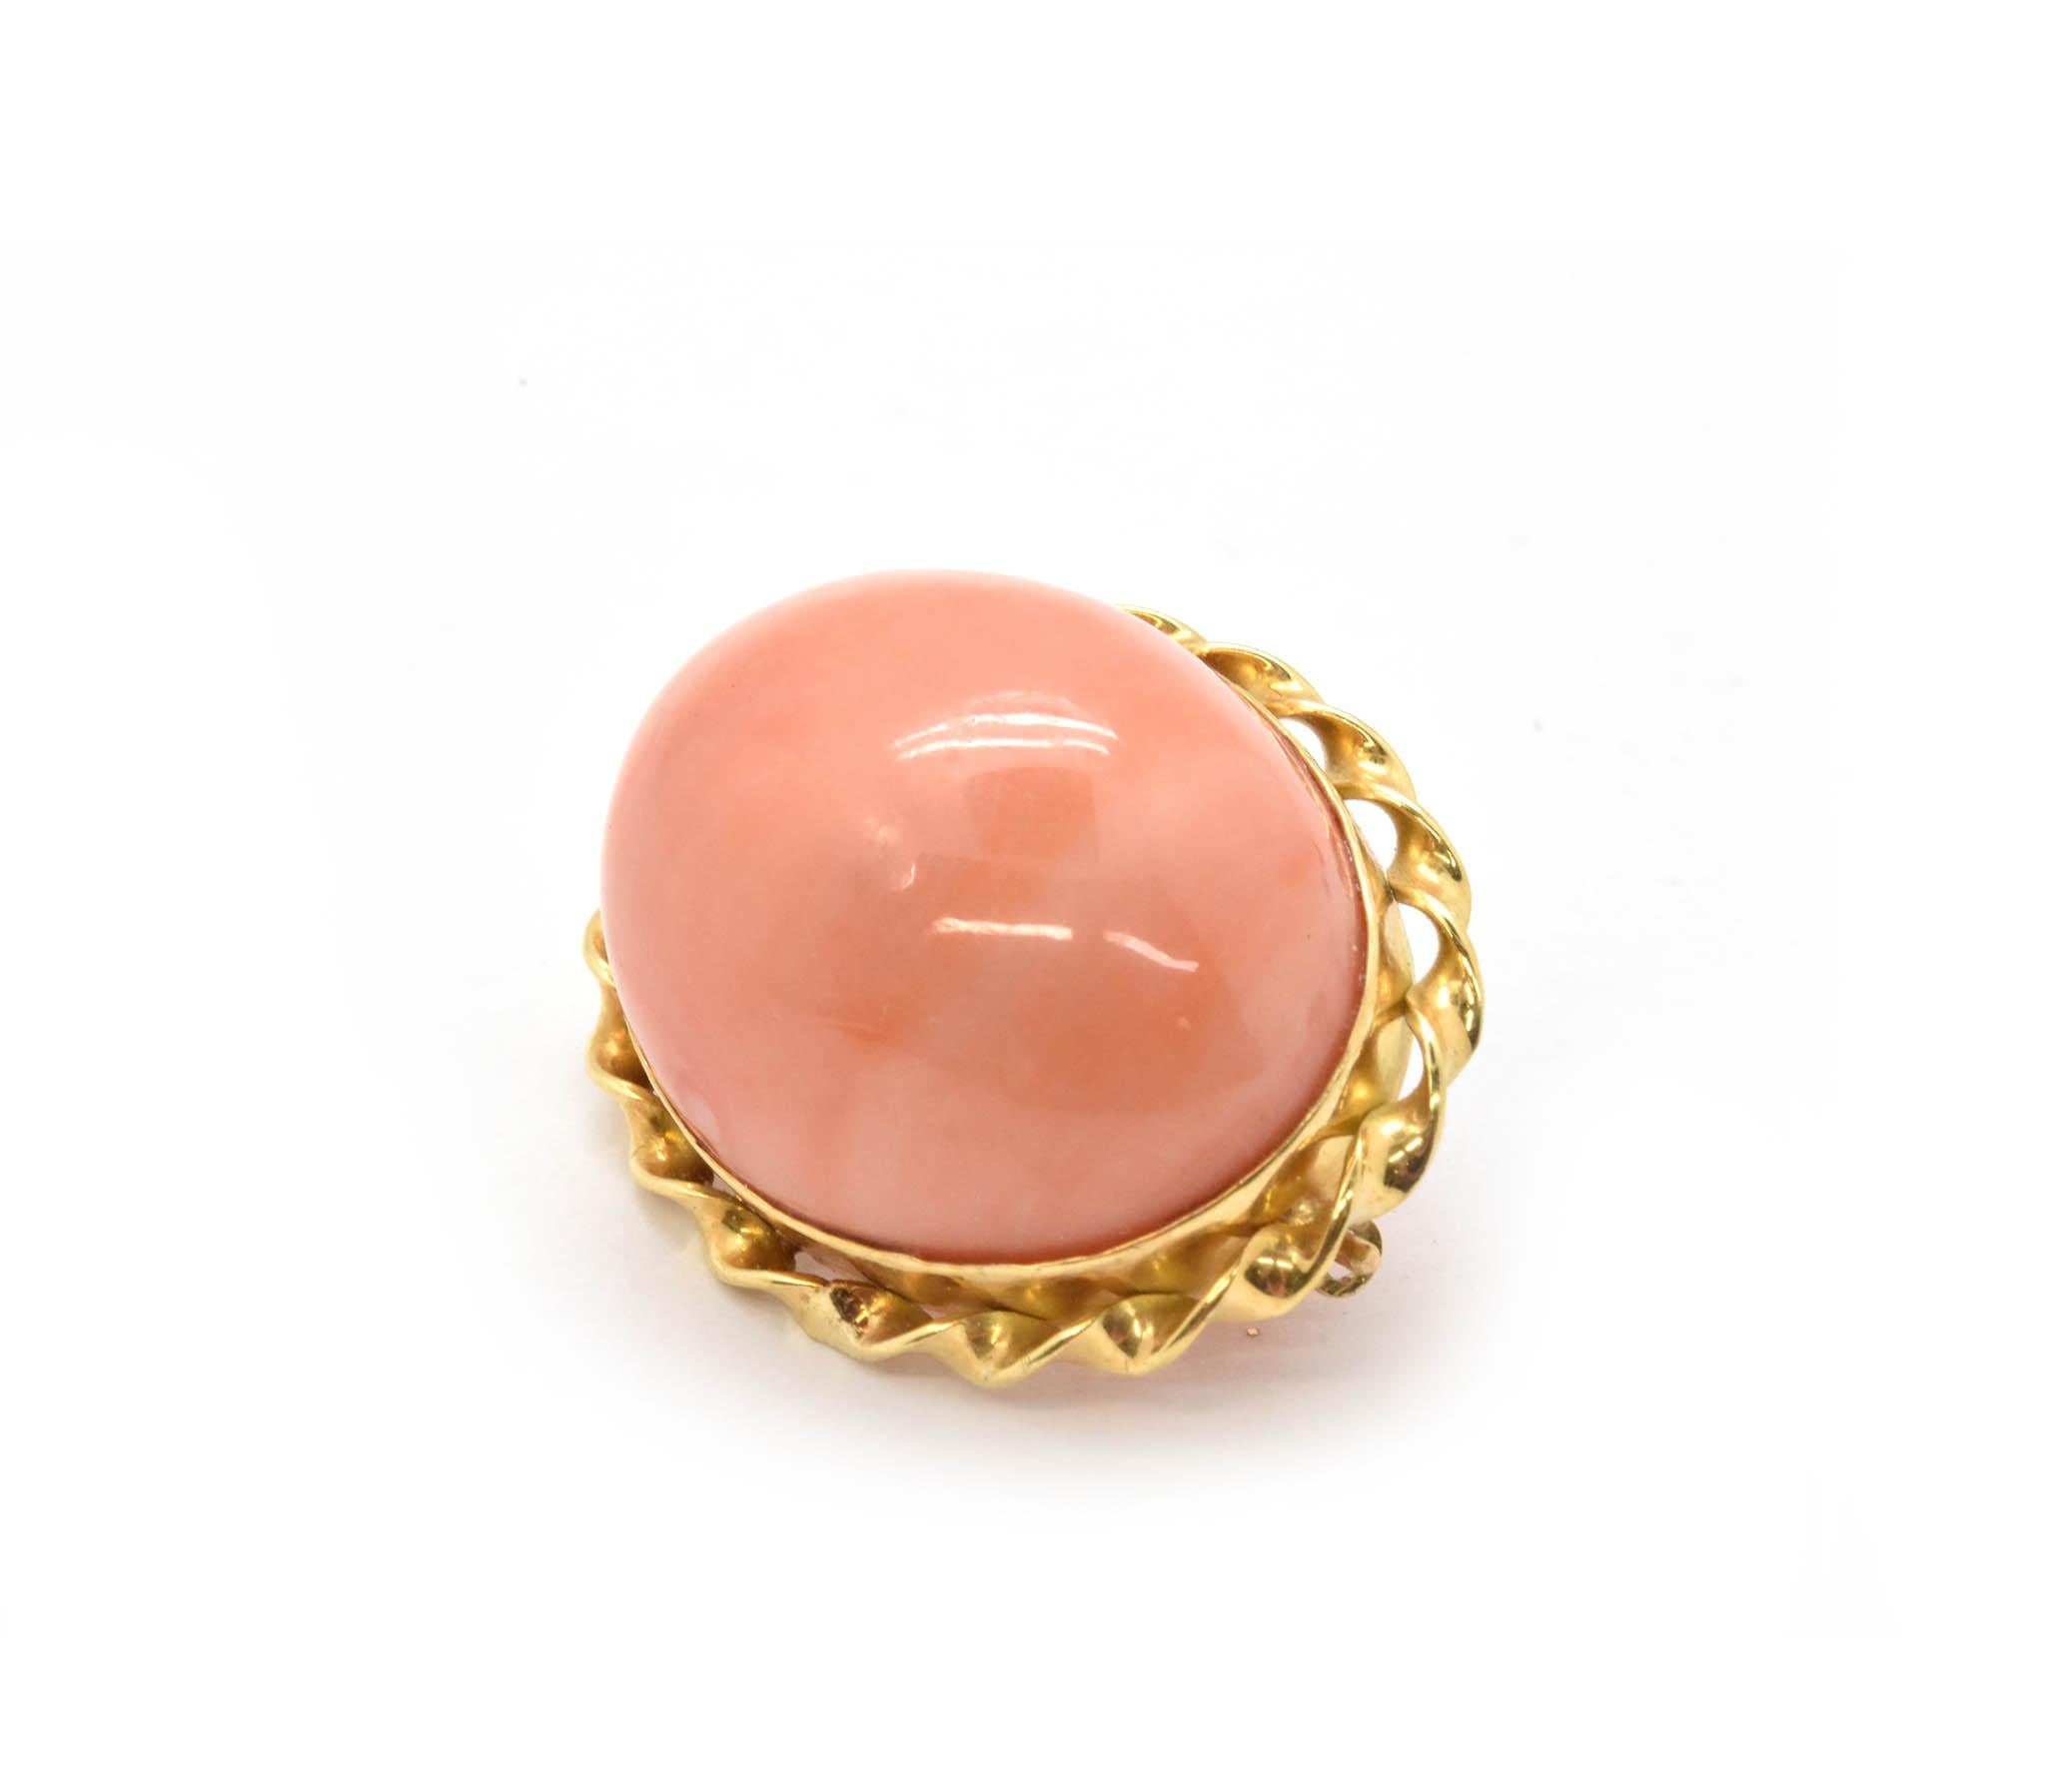 This pink coral pin is made in 18k yellow gold and set into a classy fun yellow gold twisted ribbon border. The coral has a resinous luster and measures 25x19mm. The back of the border has a pin with a safety hole so the pin doesn’t poke you! Total